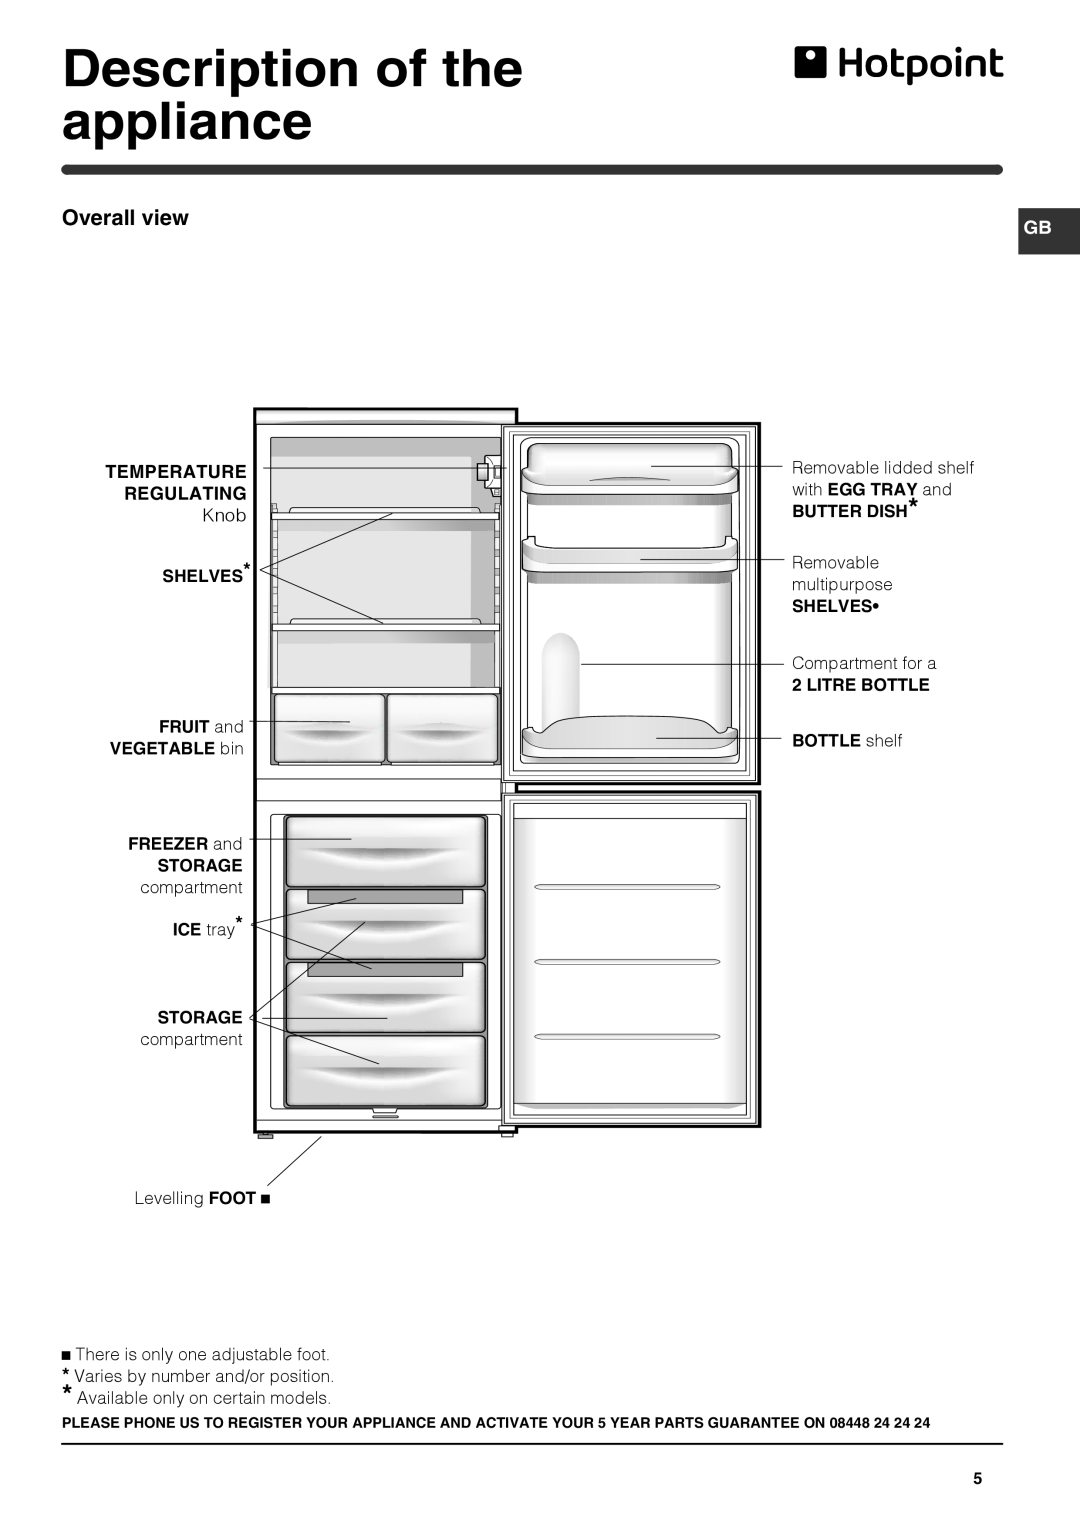 Hotpoint AFAA 52 x AI Description of the appliance, Overall view, Removable lidded shelf, Knob, multipurpose, compartment 